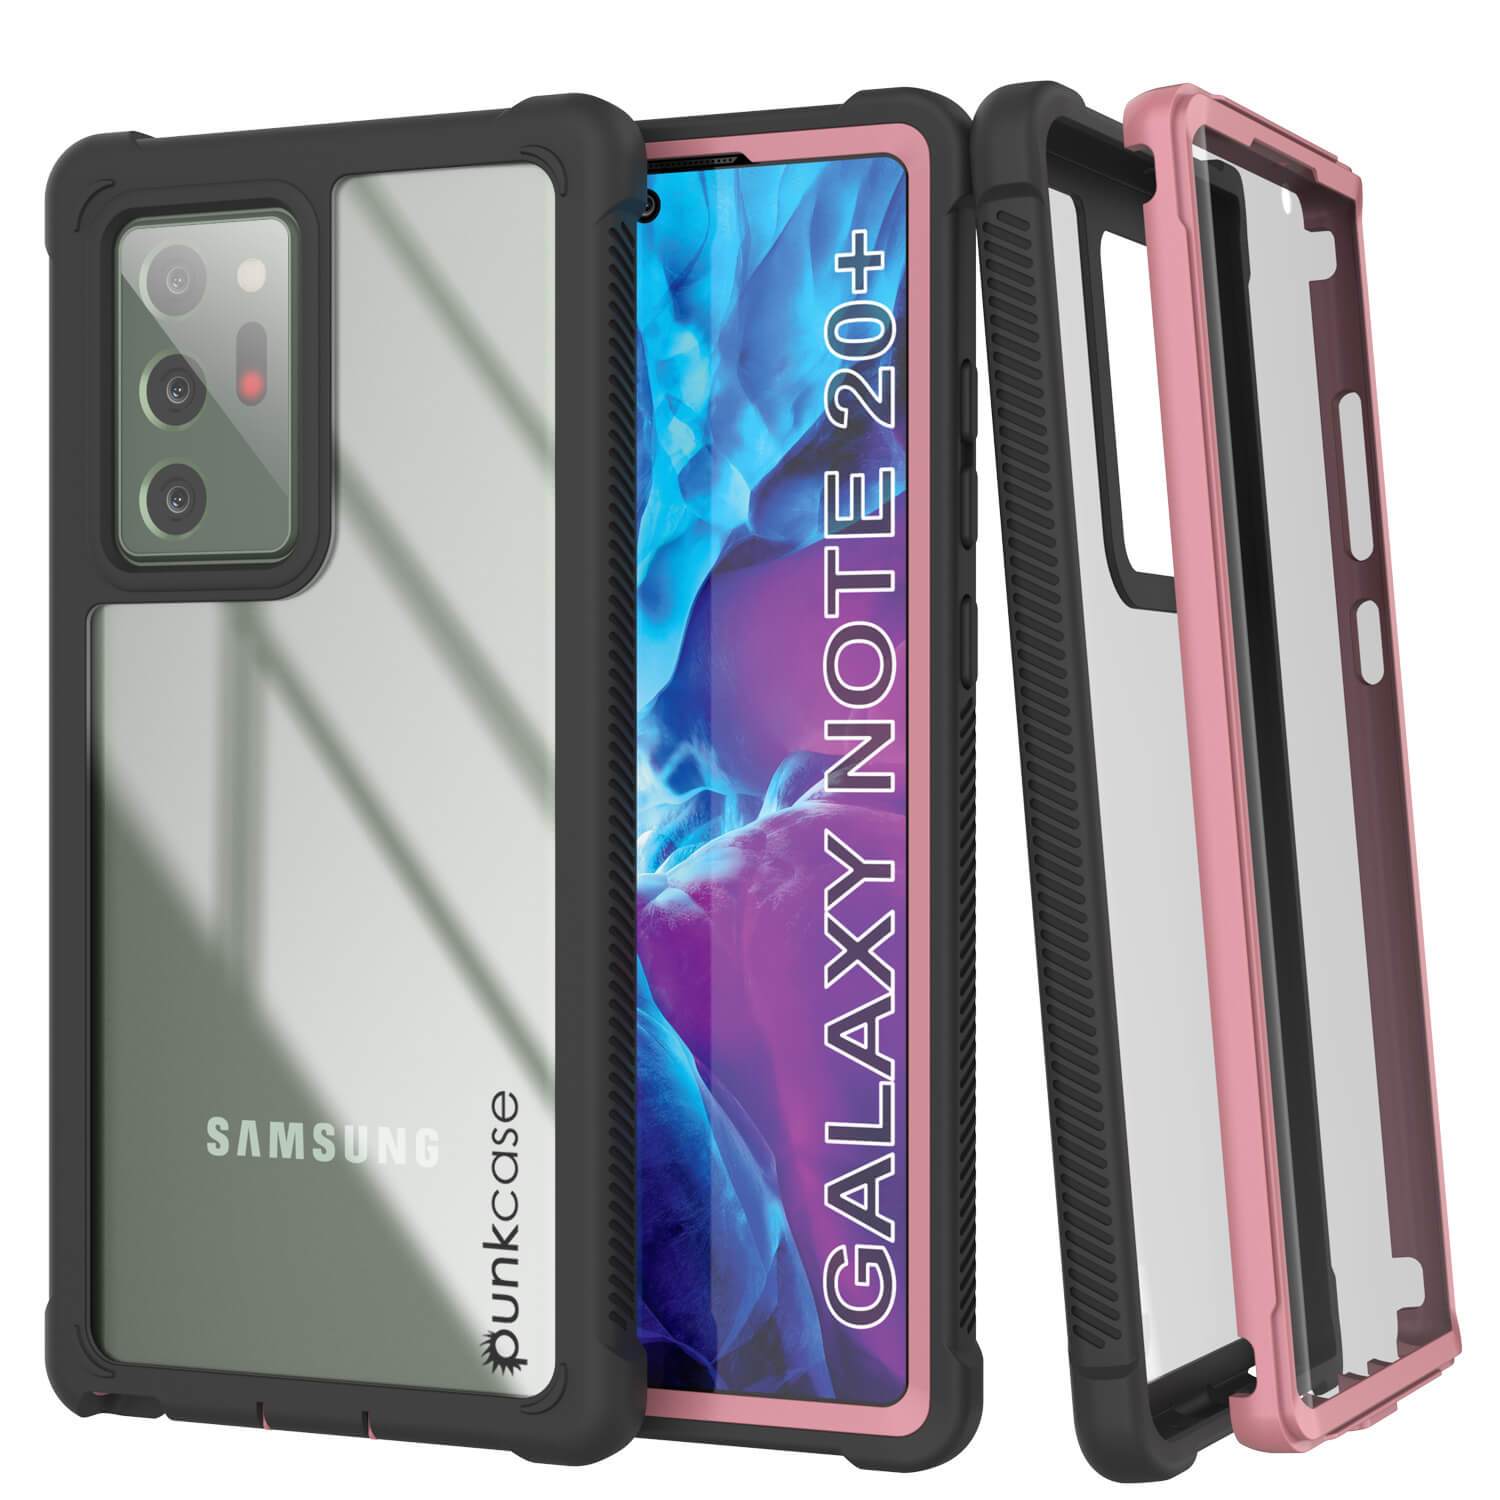 Punkcase Galaxy Note 20 Ultra Case, [Spartan Series] Pink Rugged Heavy Duty Cover W/Built in Screen Protector